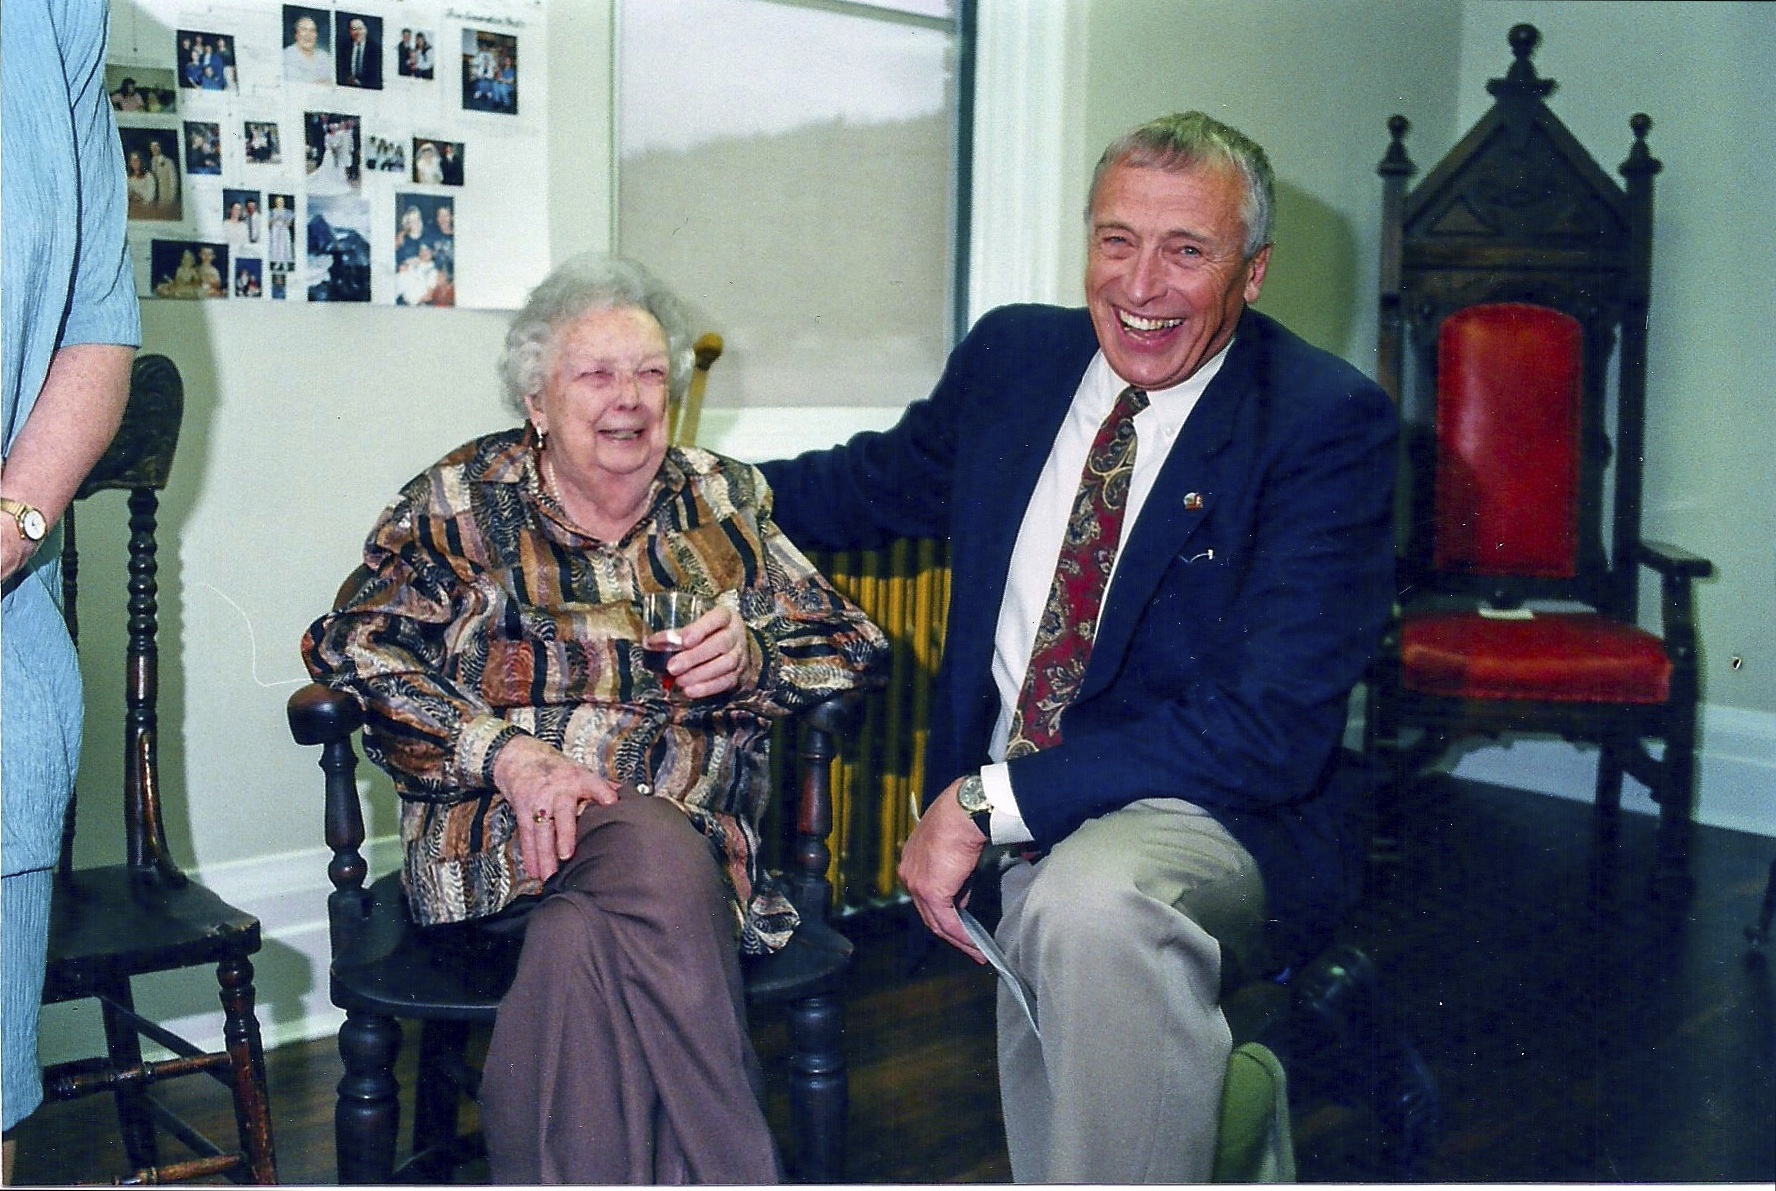 Ruby Nobbs in her 90s sitting on a chair with Mayor Dr. Geoff Battersby kneeling beside her at opening of Ruby Nobbs Community Archives